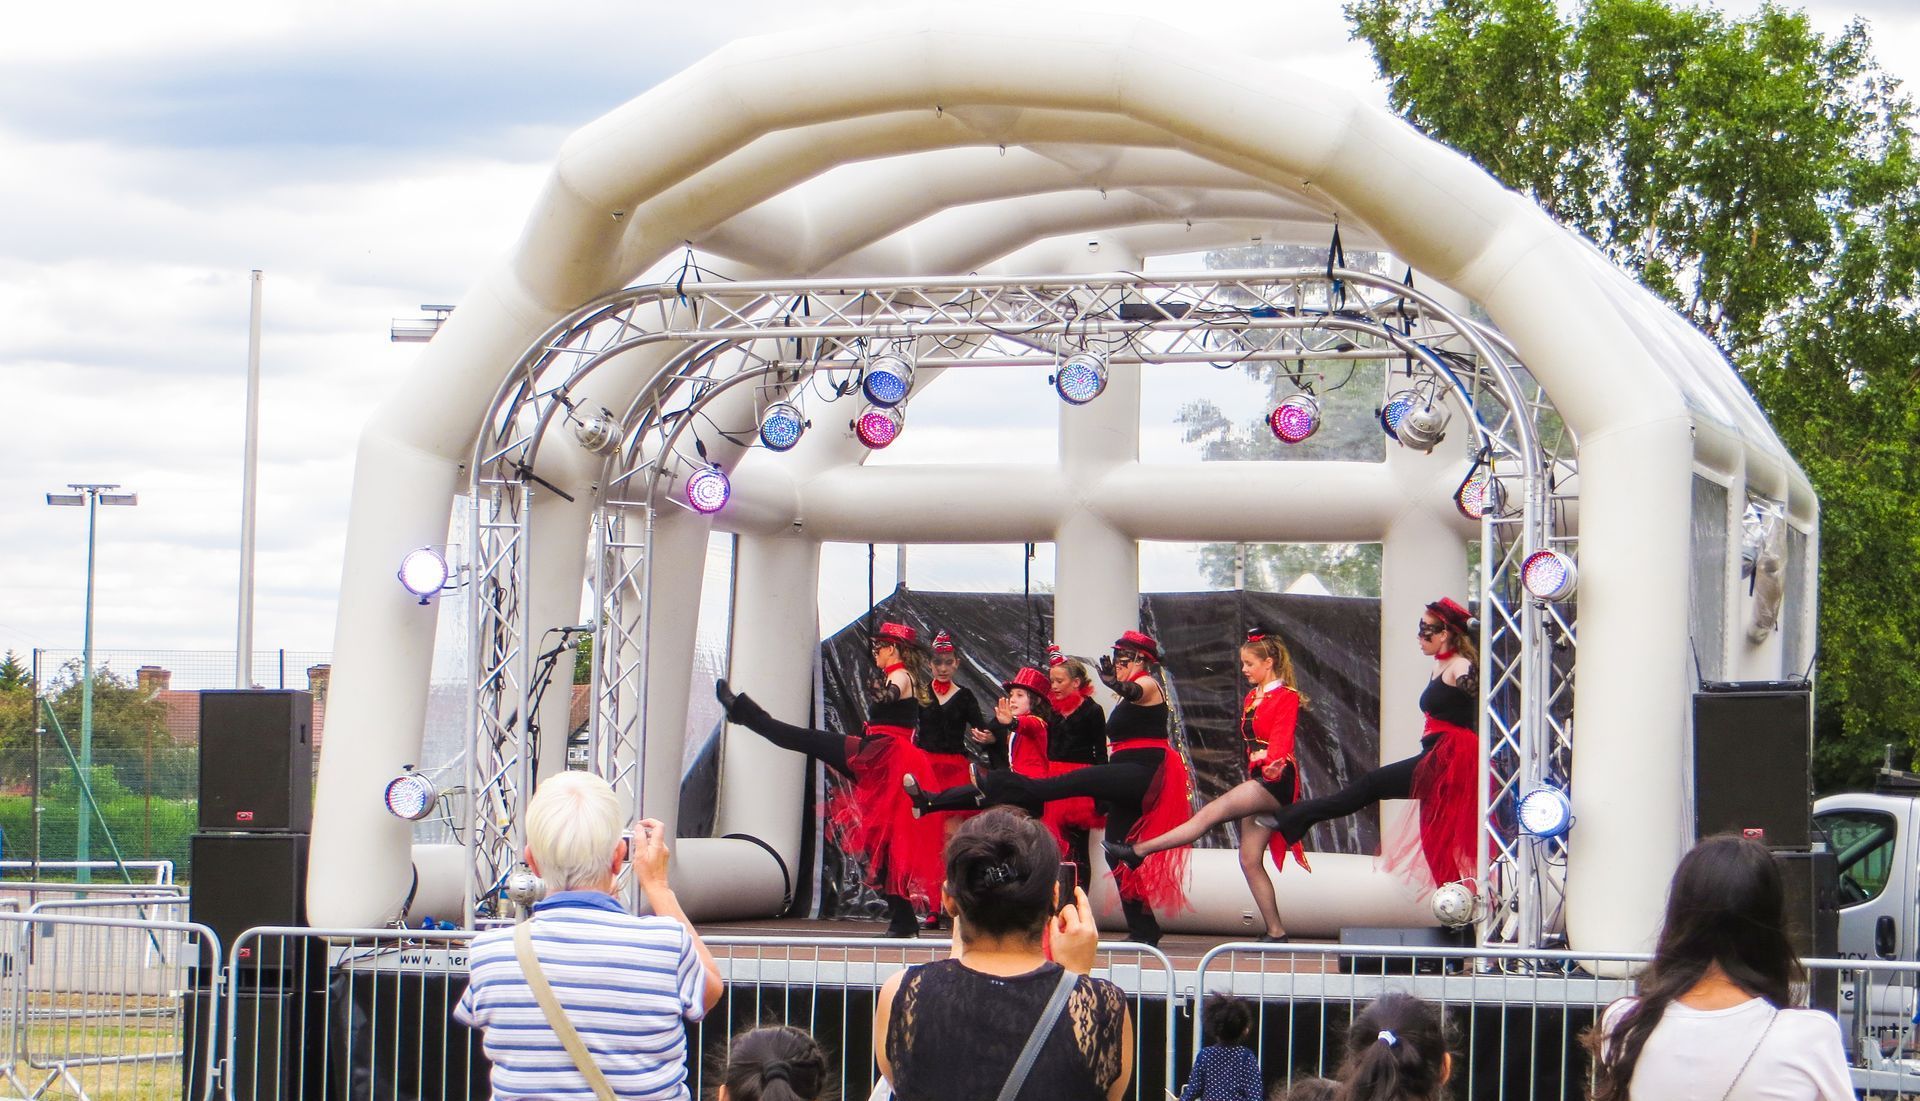 Inflatable stage at redbridge event in 2015, with dancers on stage dressed in red and black.